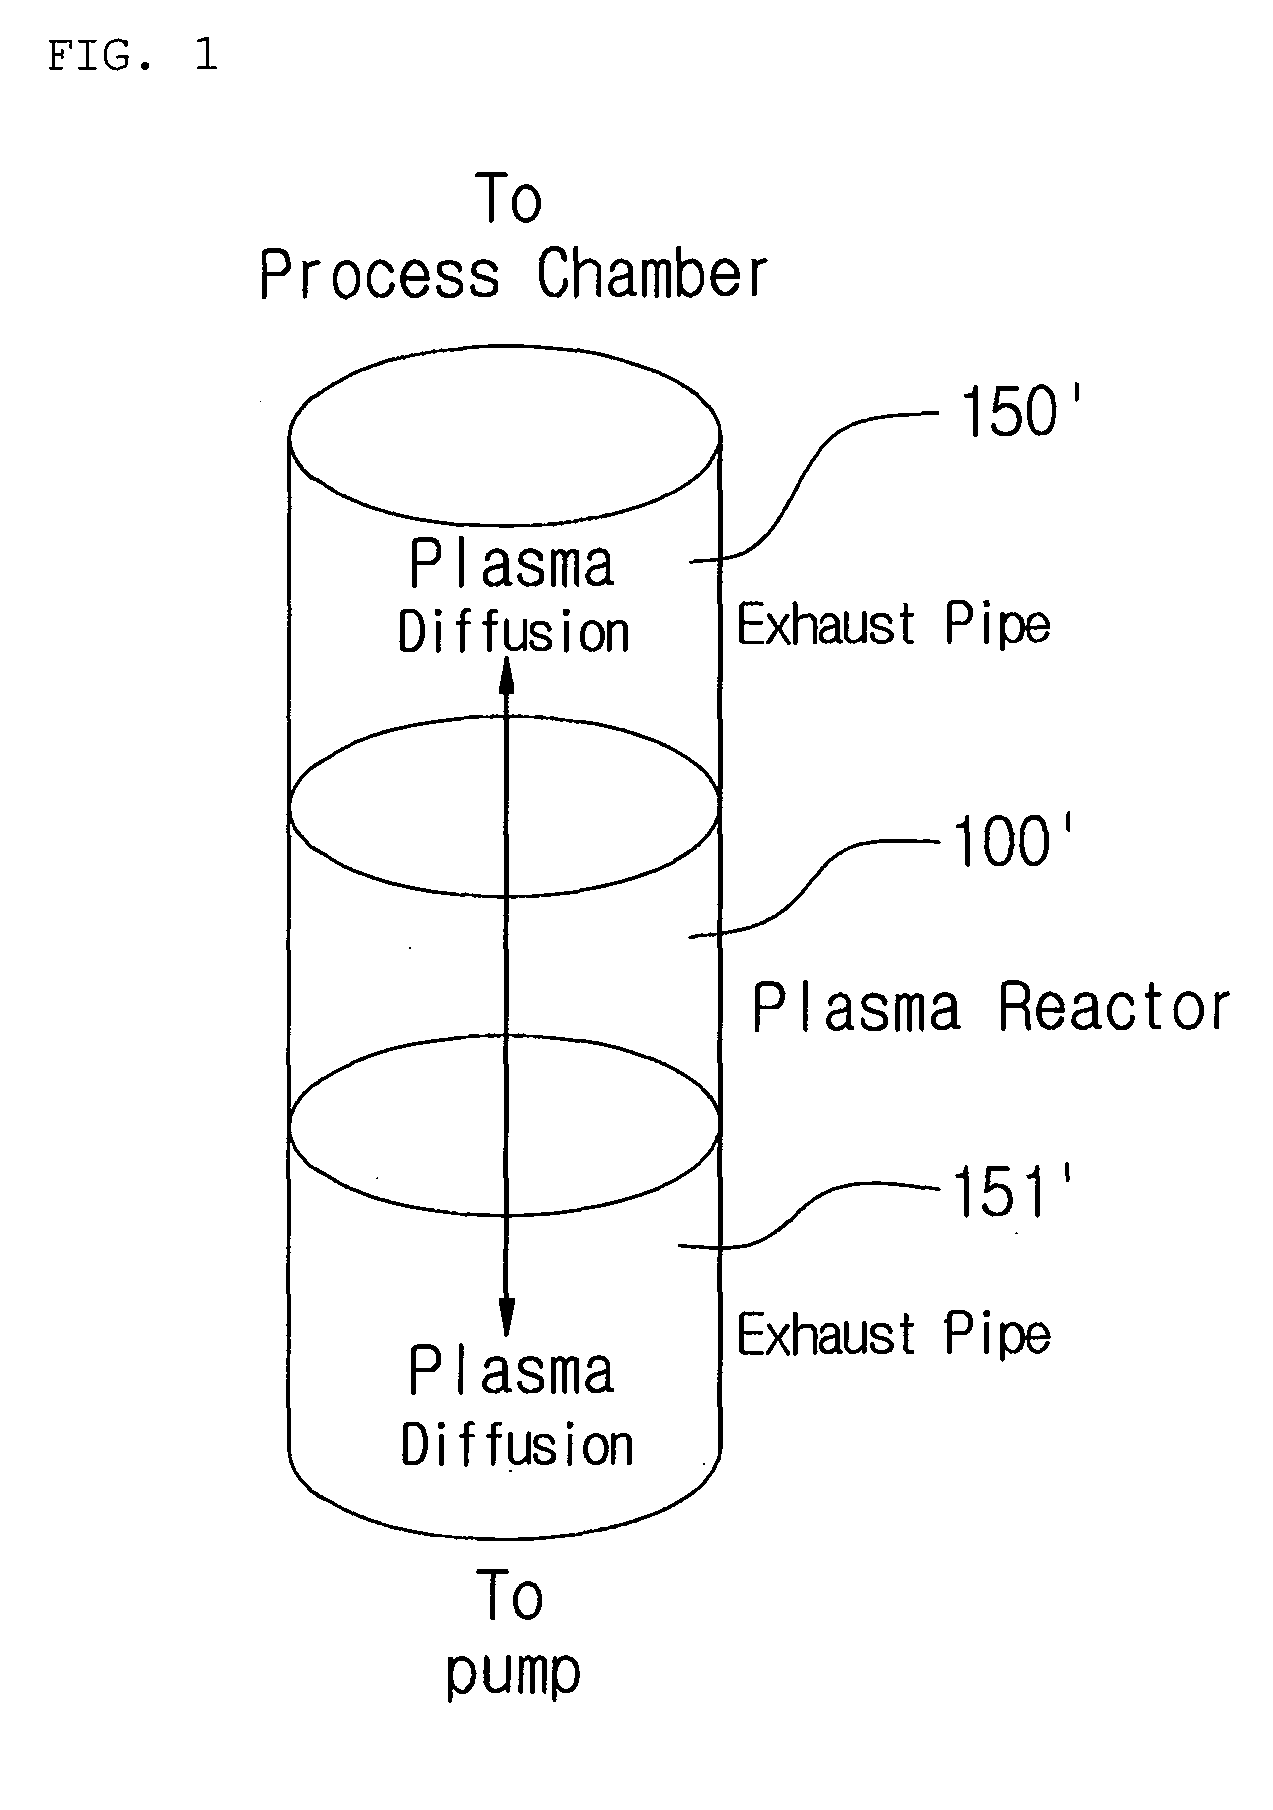 Apparatus for decomposing perfluorocarbon and harmful gas using high-density confined plasma source